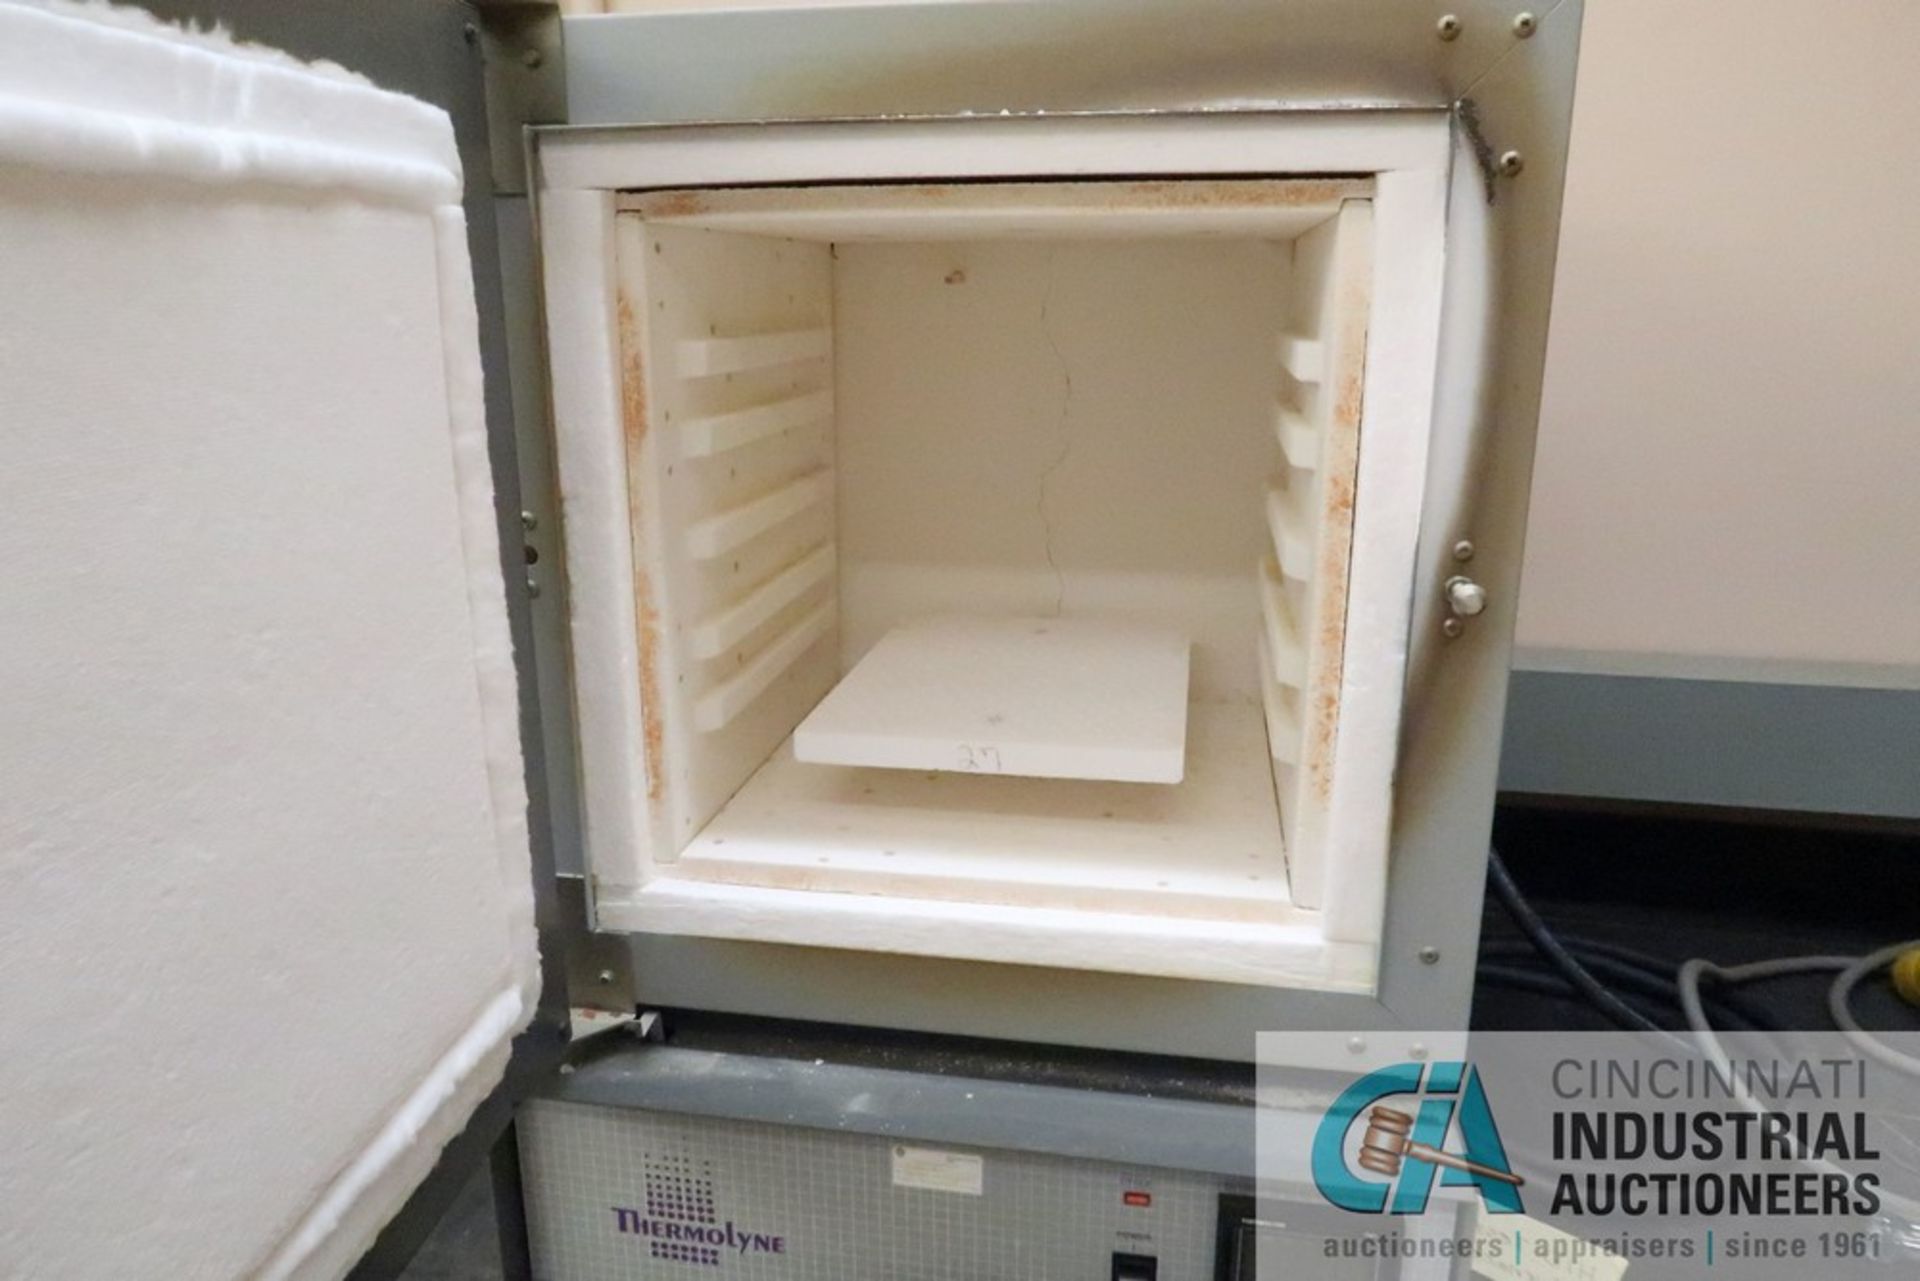 THERMOLYNE MODEL 30400 OVEN, 13" X 13" X 13" CHAMBER (ROOM 4) - Located in the basement - Image 2 of 3